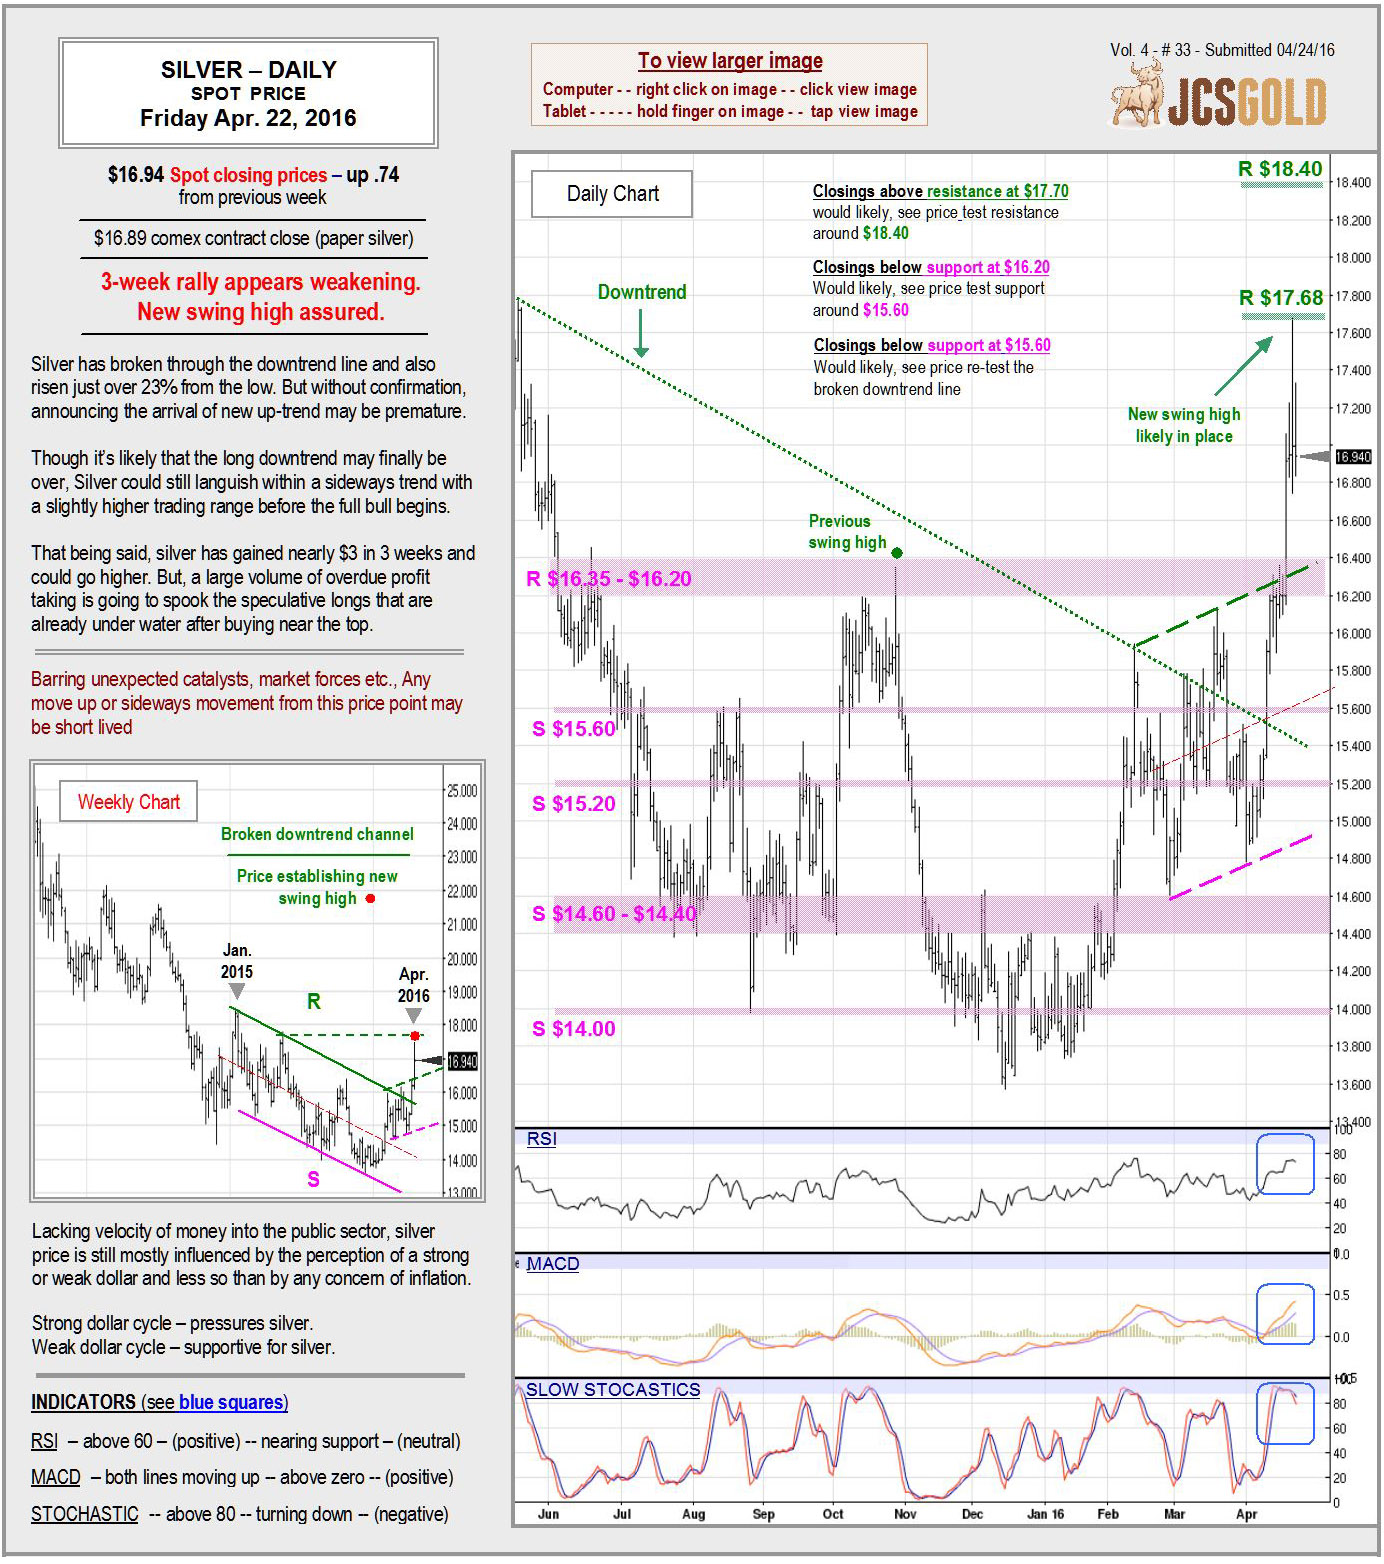 April 22, 2016 chart & commentary